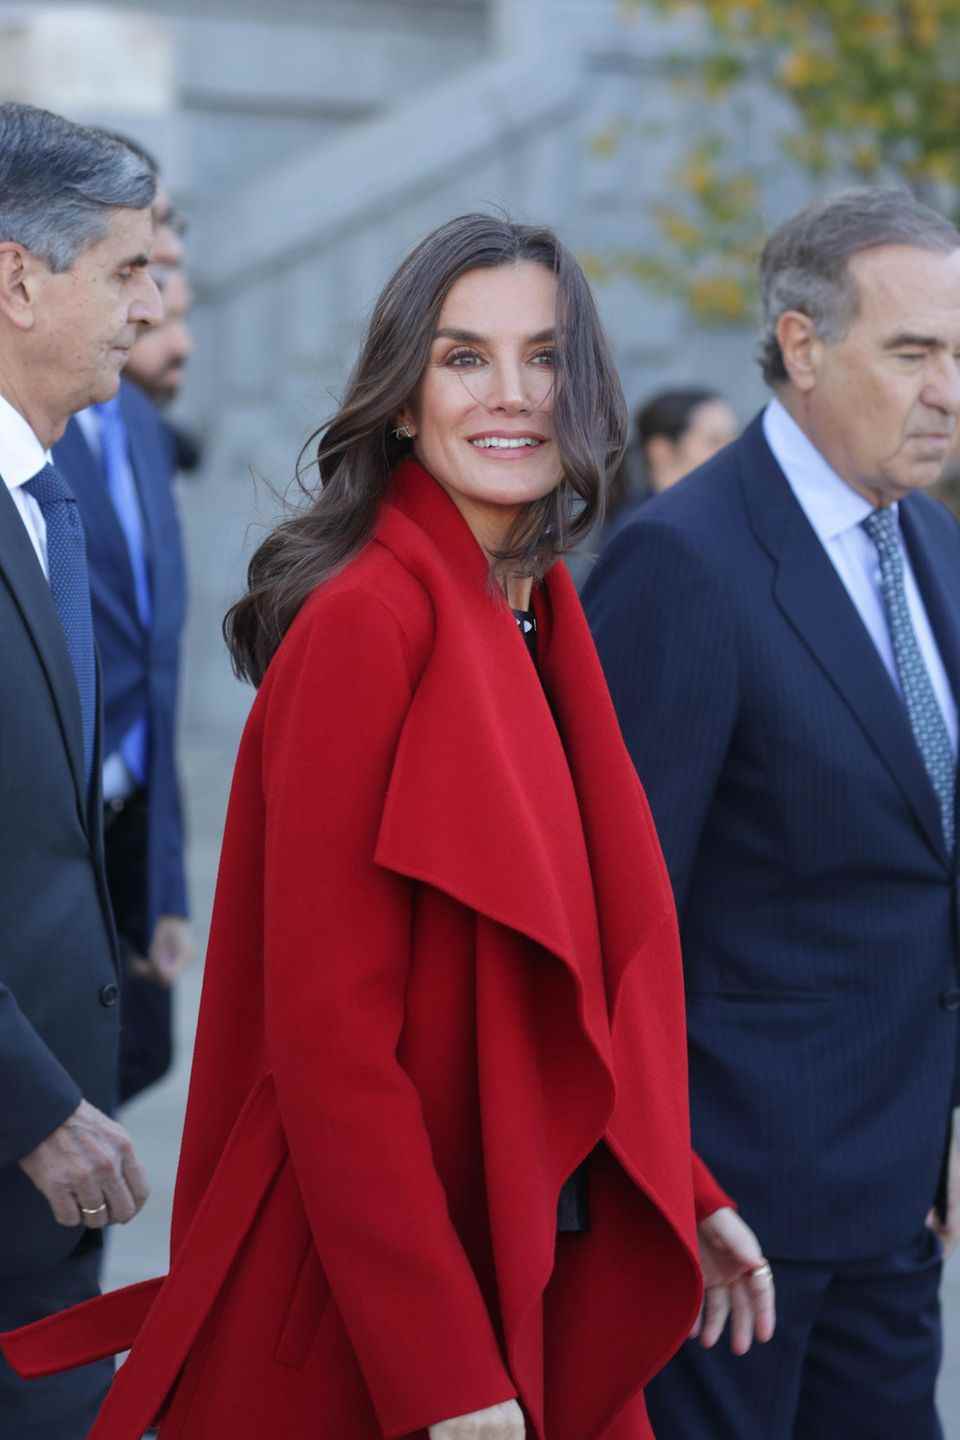 Queen Letizia has to deal with some gusts of wind at the meeting in Madrid.  However, a picture from the side shows: the Spanish royal has remained true to her long mane.